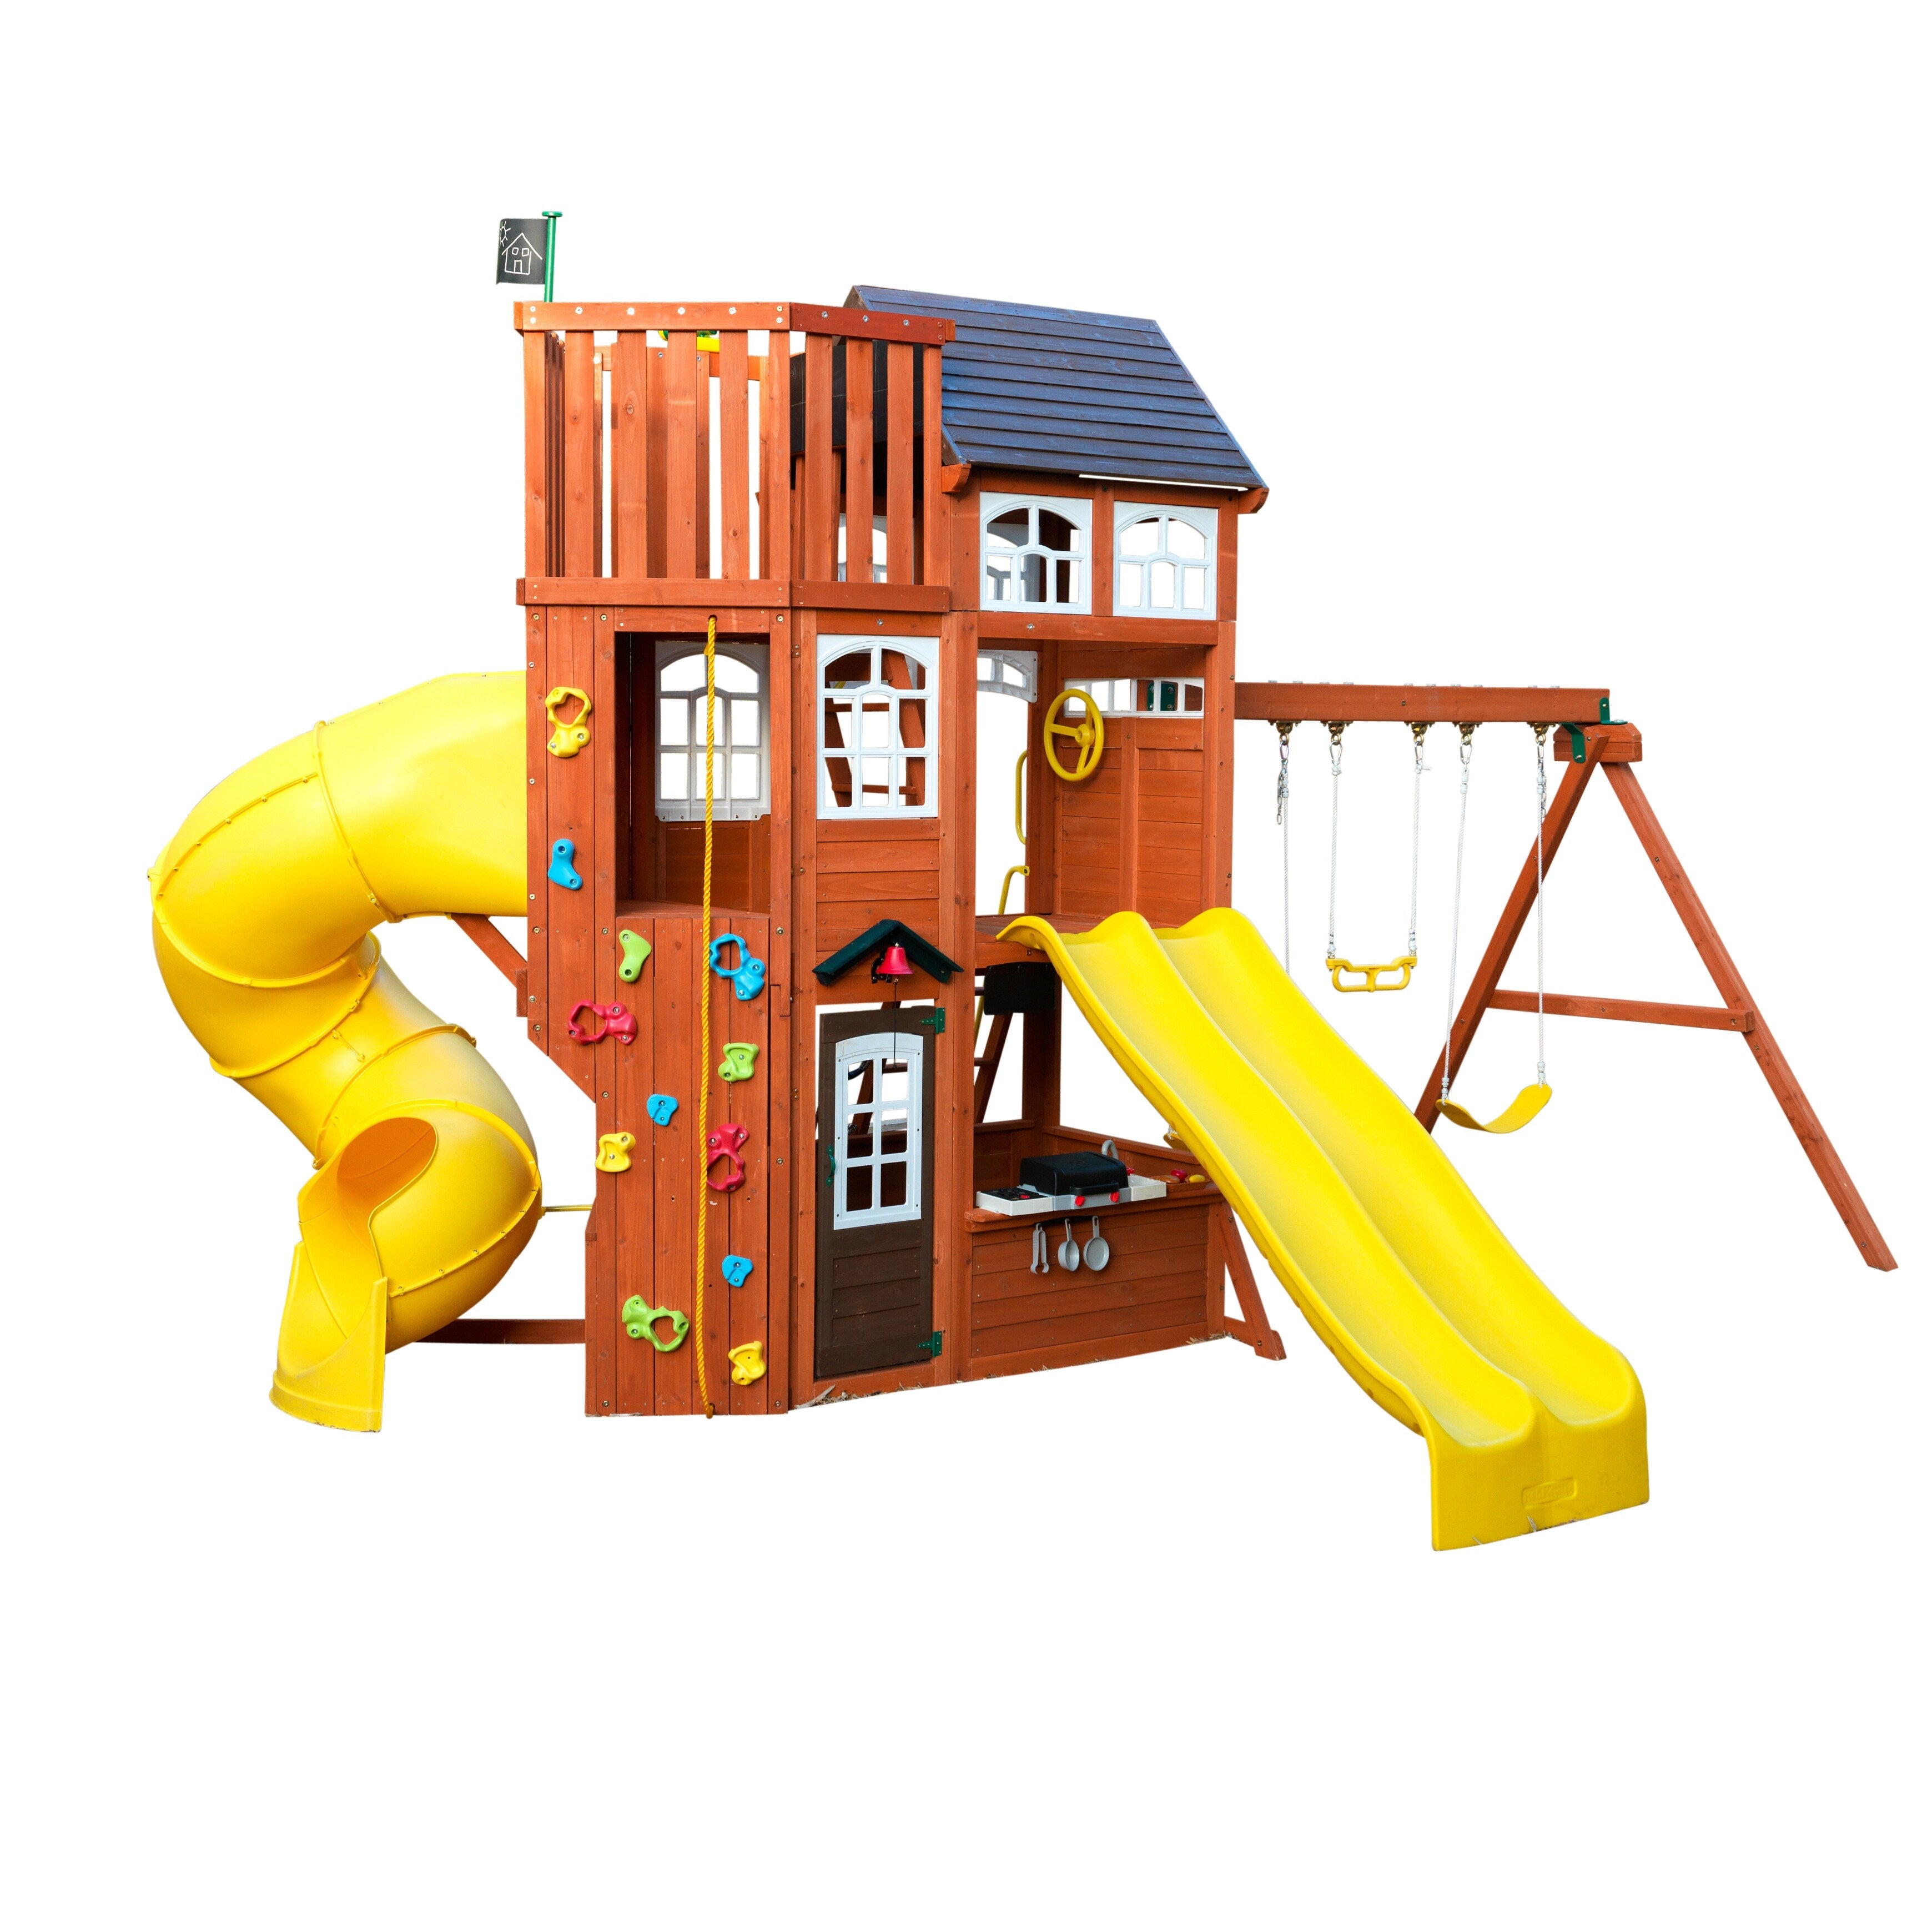 Sub-Collection image Kidkraft Wooden Swing Sets And Playhouses